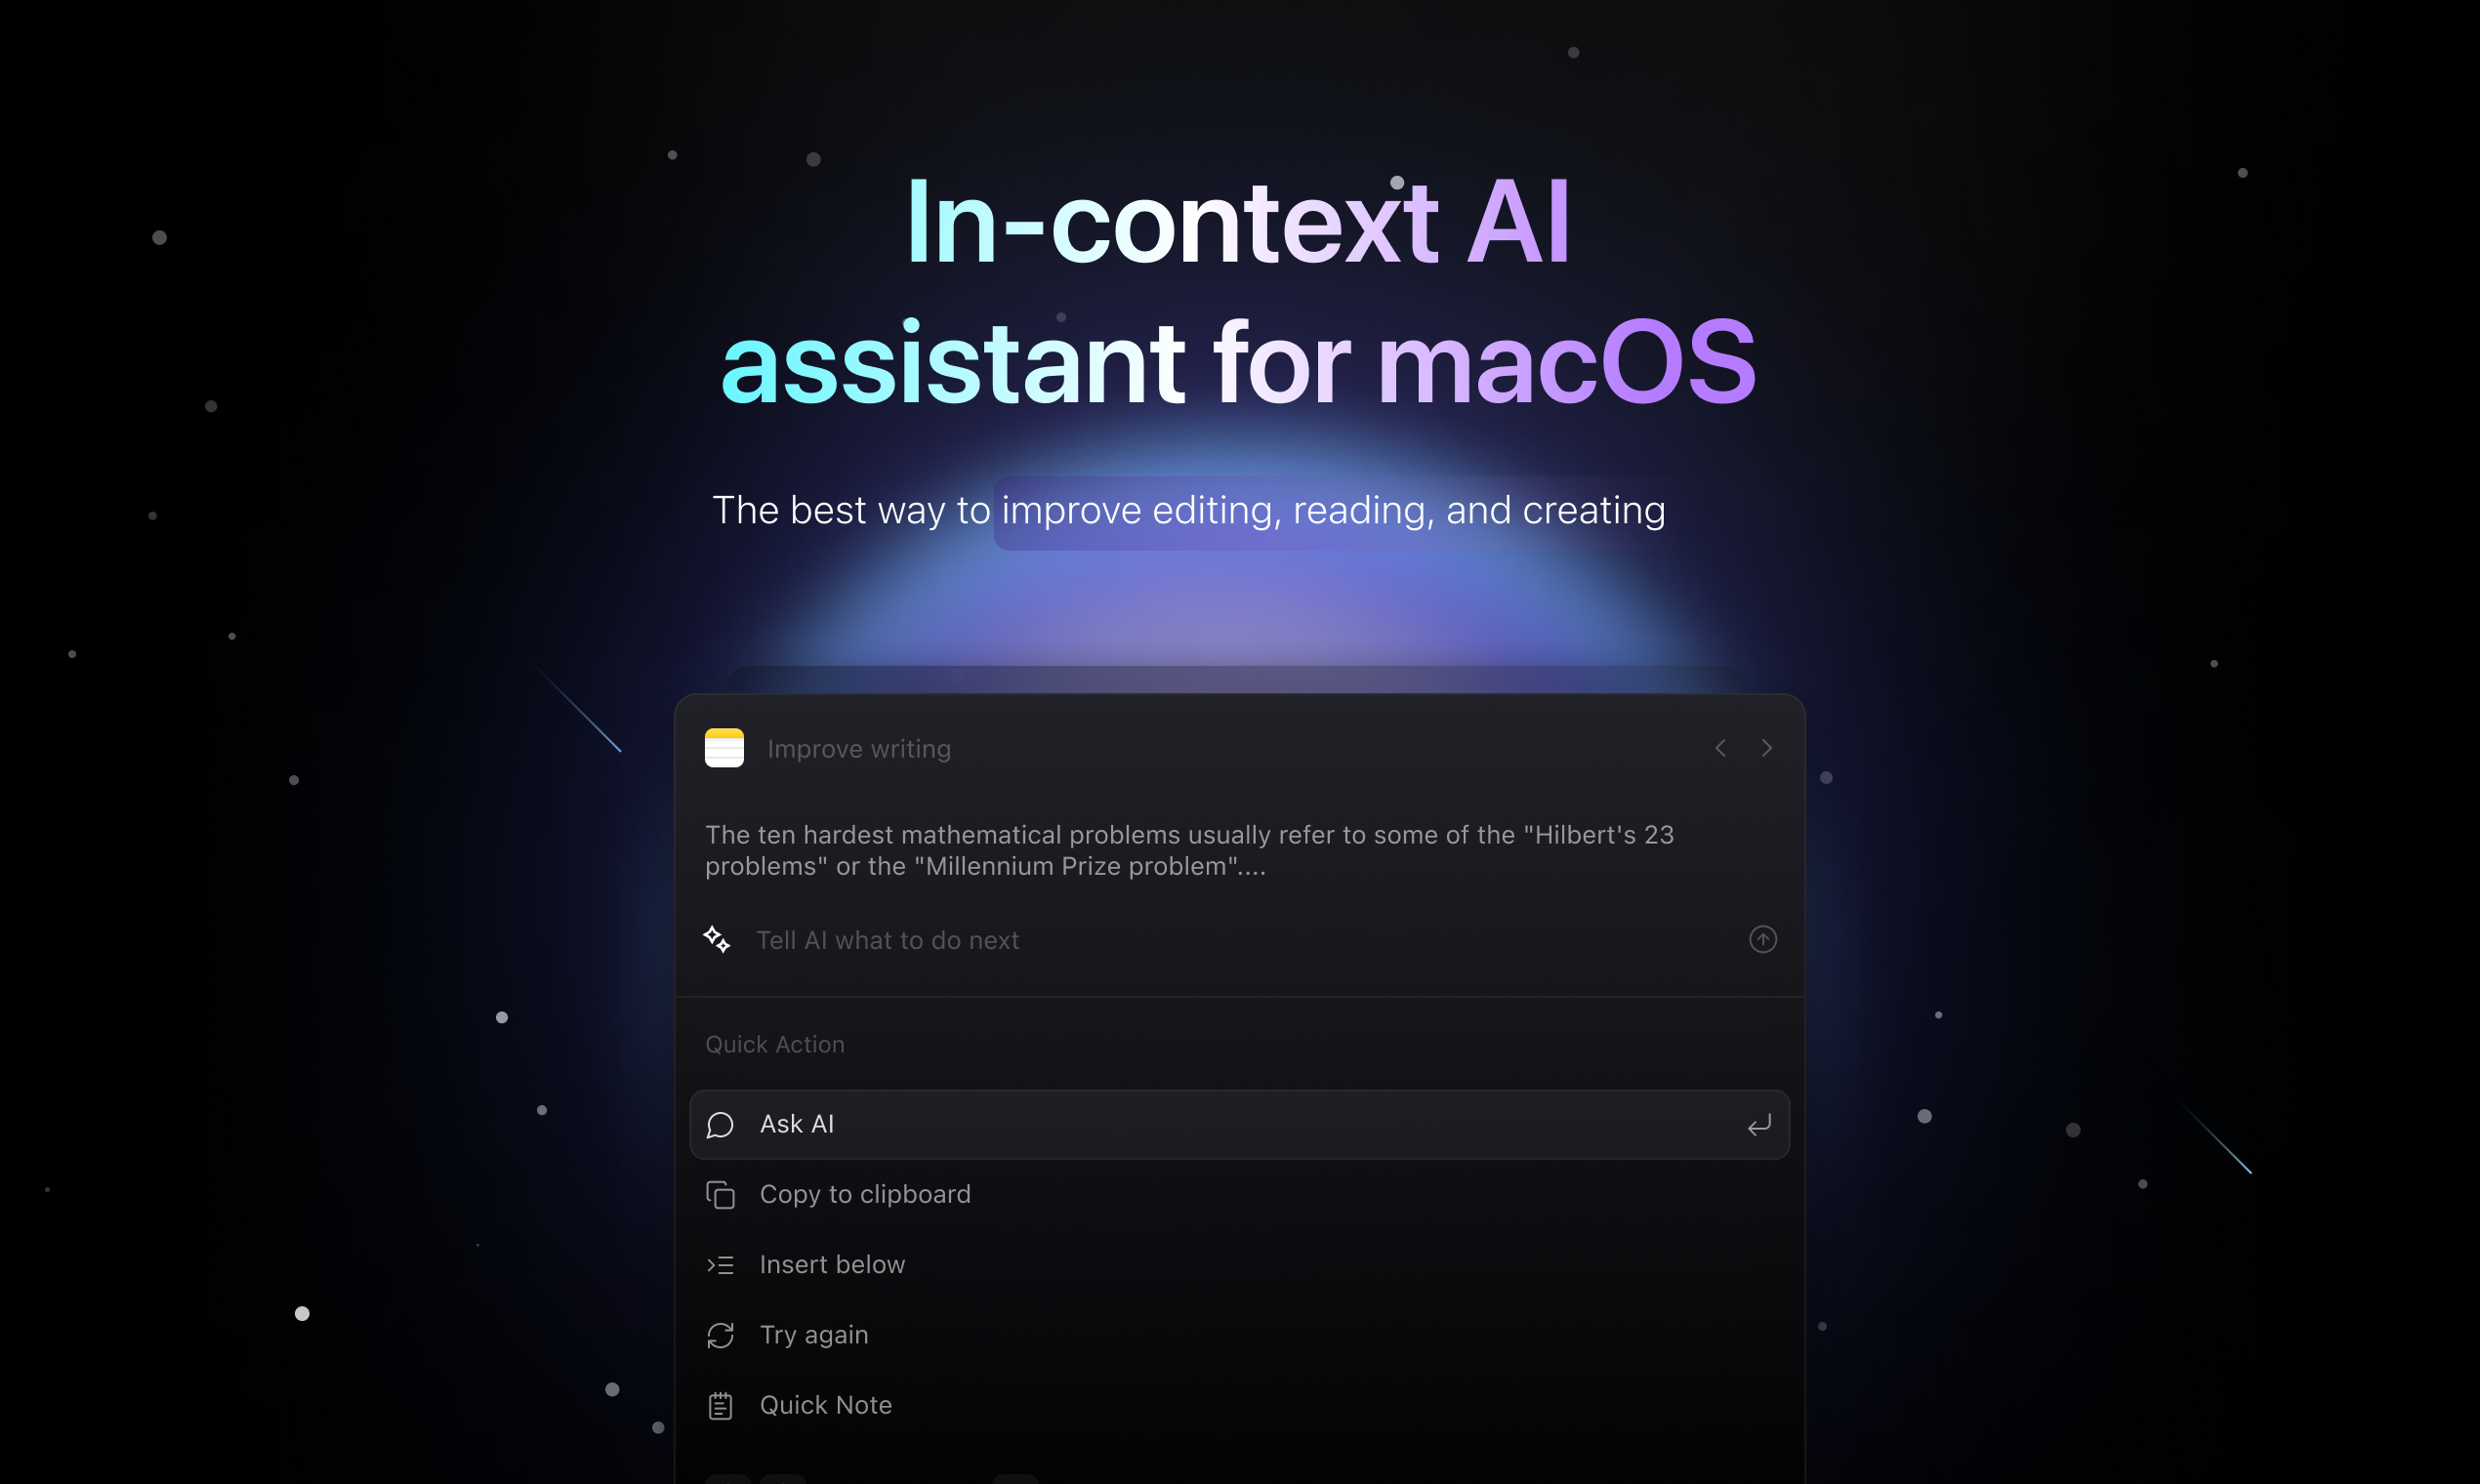 haye - In-context AI assistant for macOS